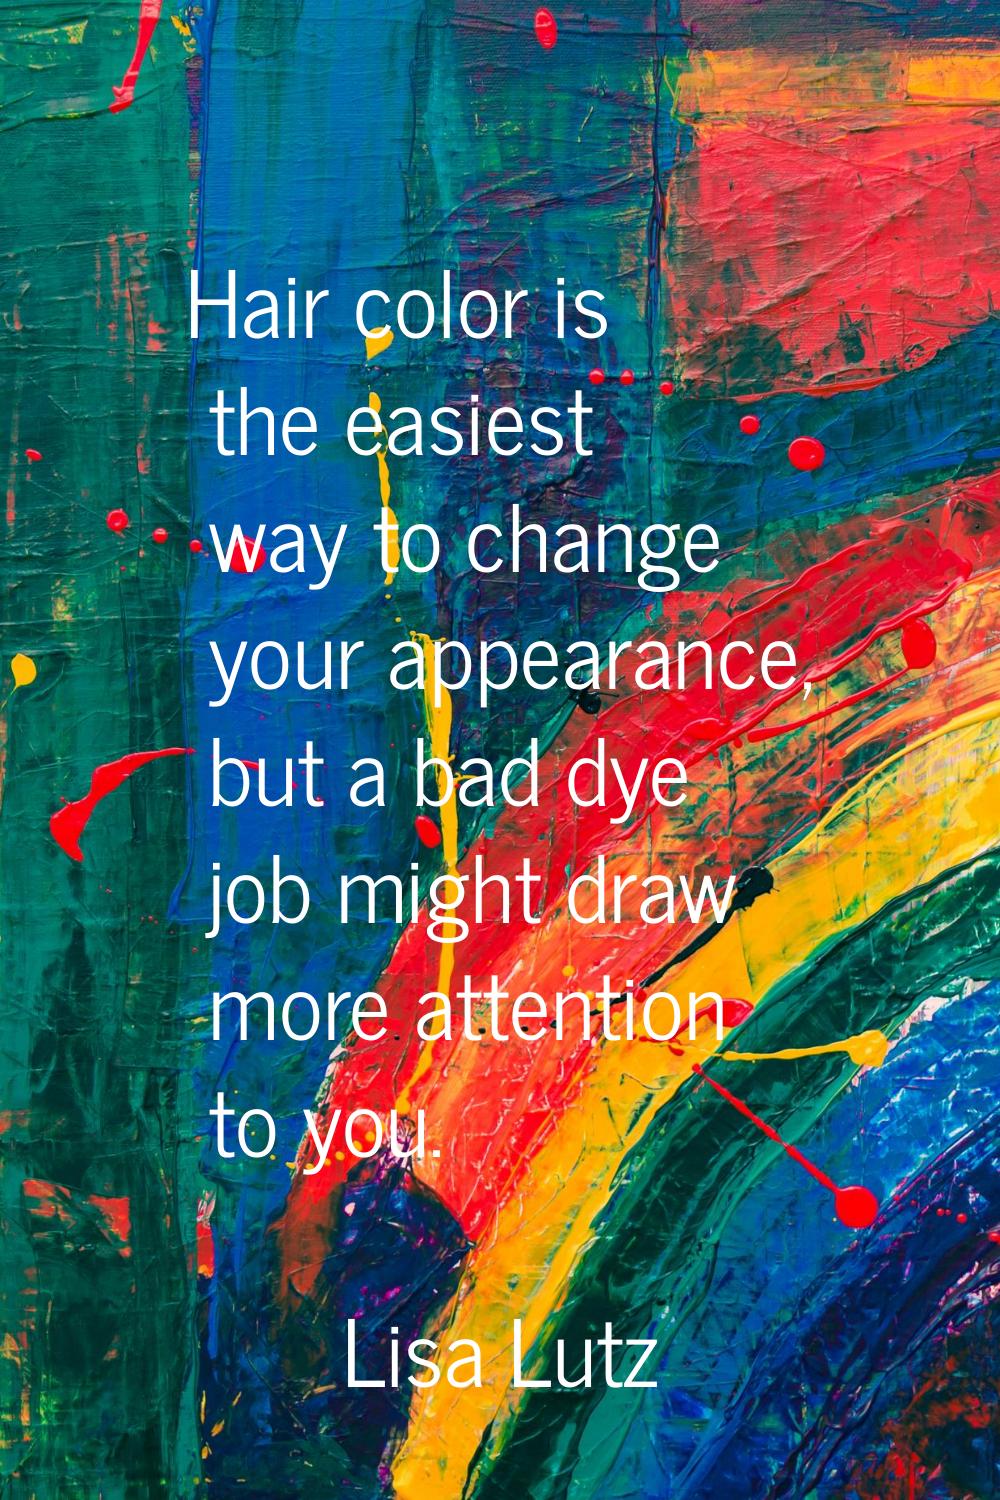 Hair color is the easiest way to change your appearance, but a bad dye job might draw more attentio